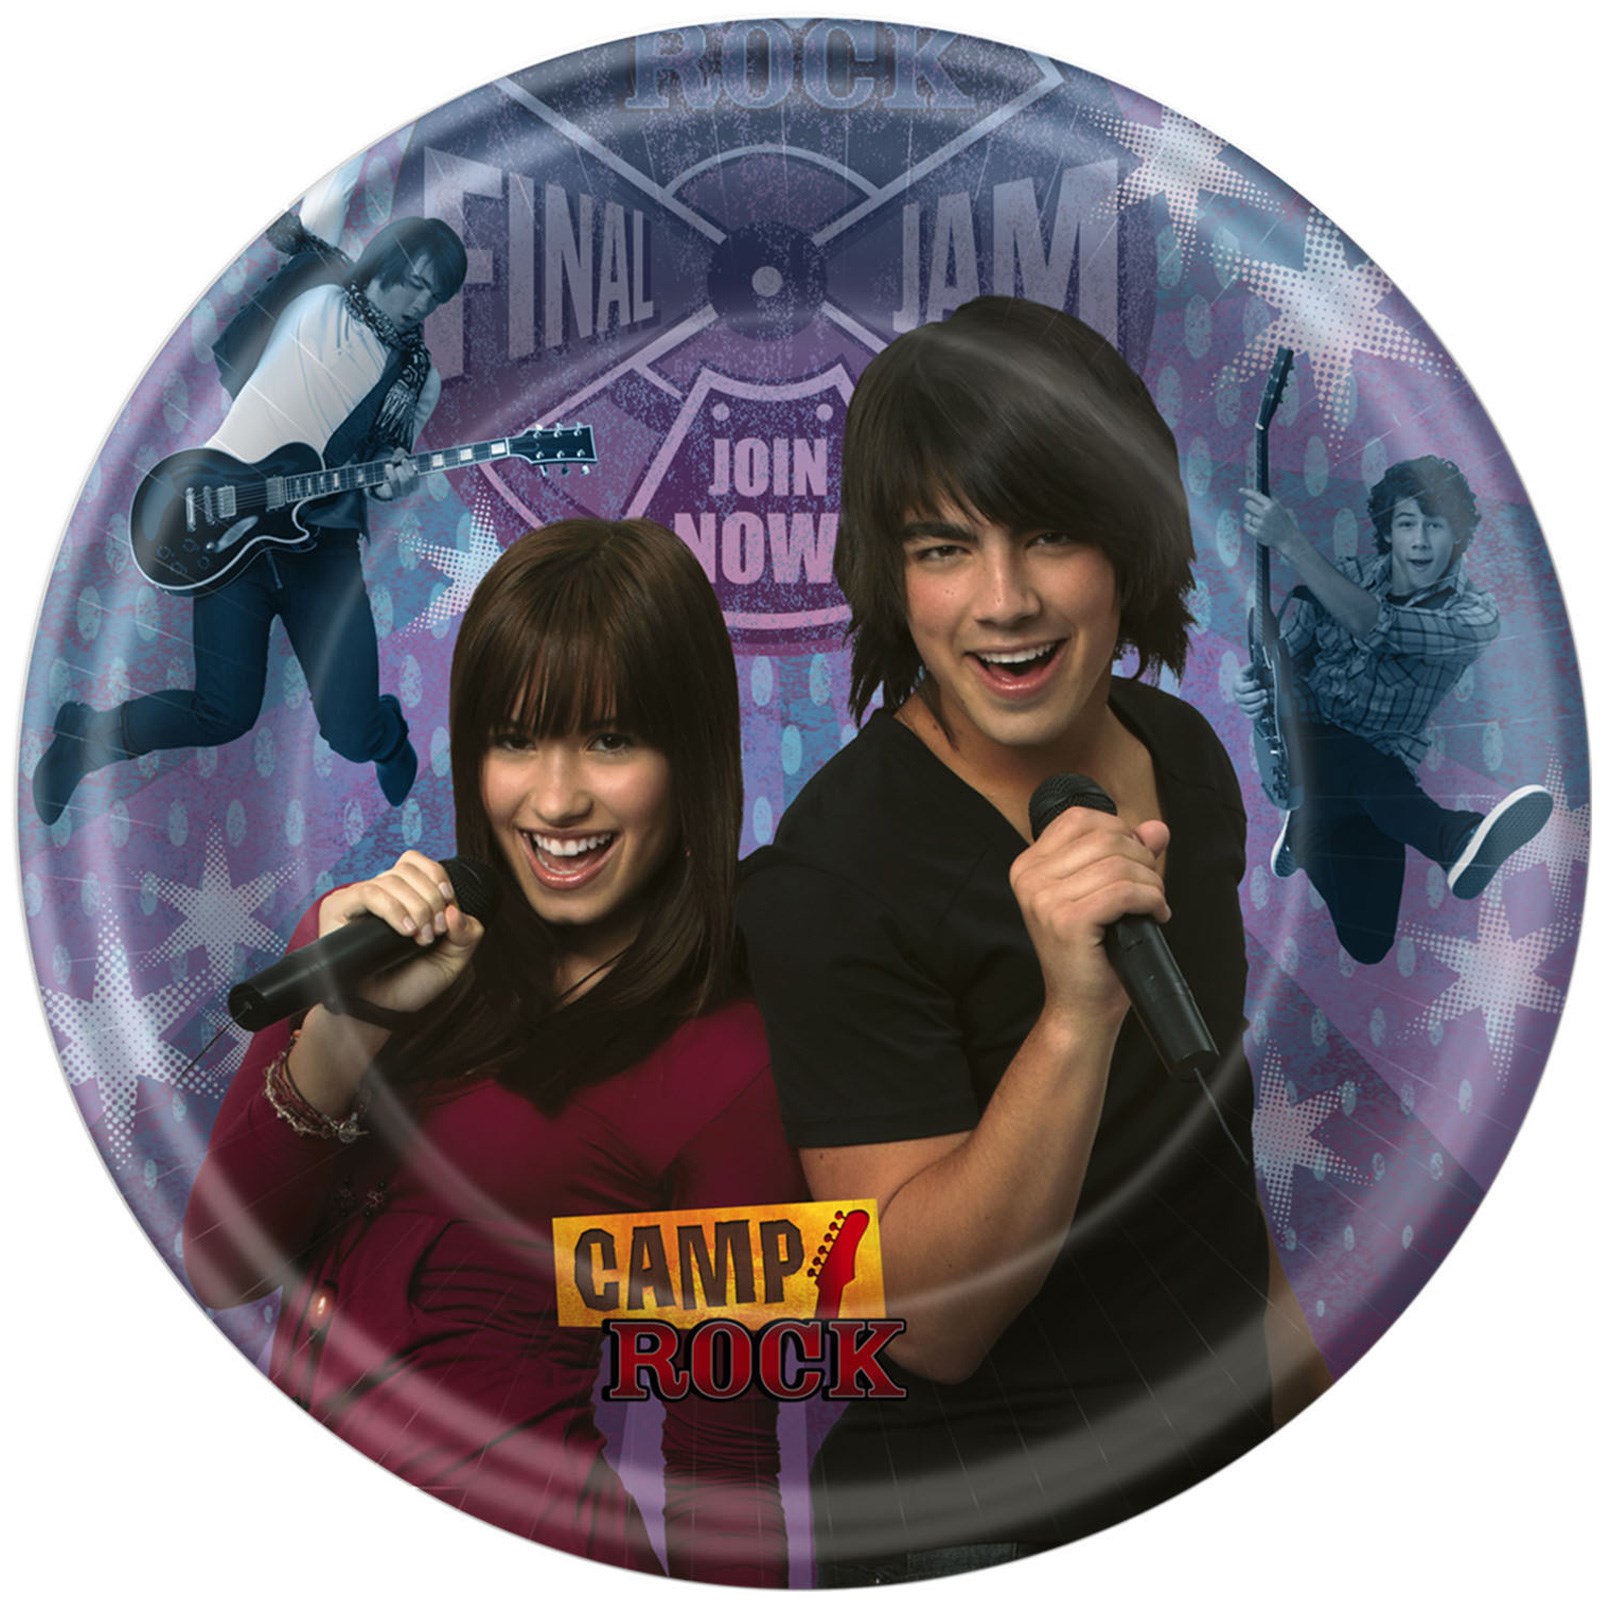 Camp Rock Dinner Plates 8 count